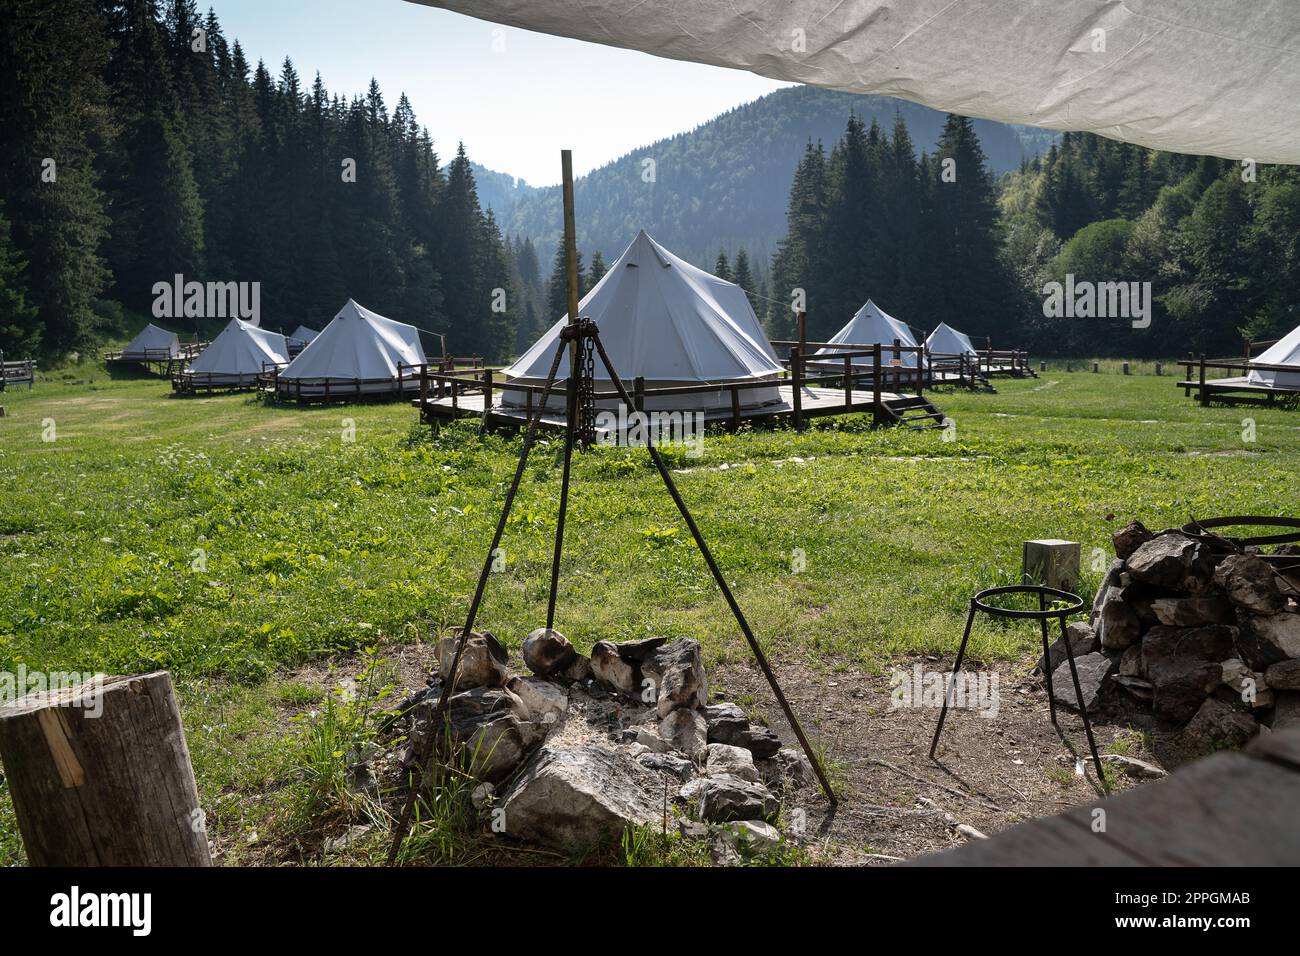 cooking area with fireplace in glamping tent camp site in green meadow surrounded by fir tree forest Stock Photo